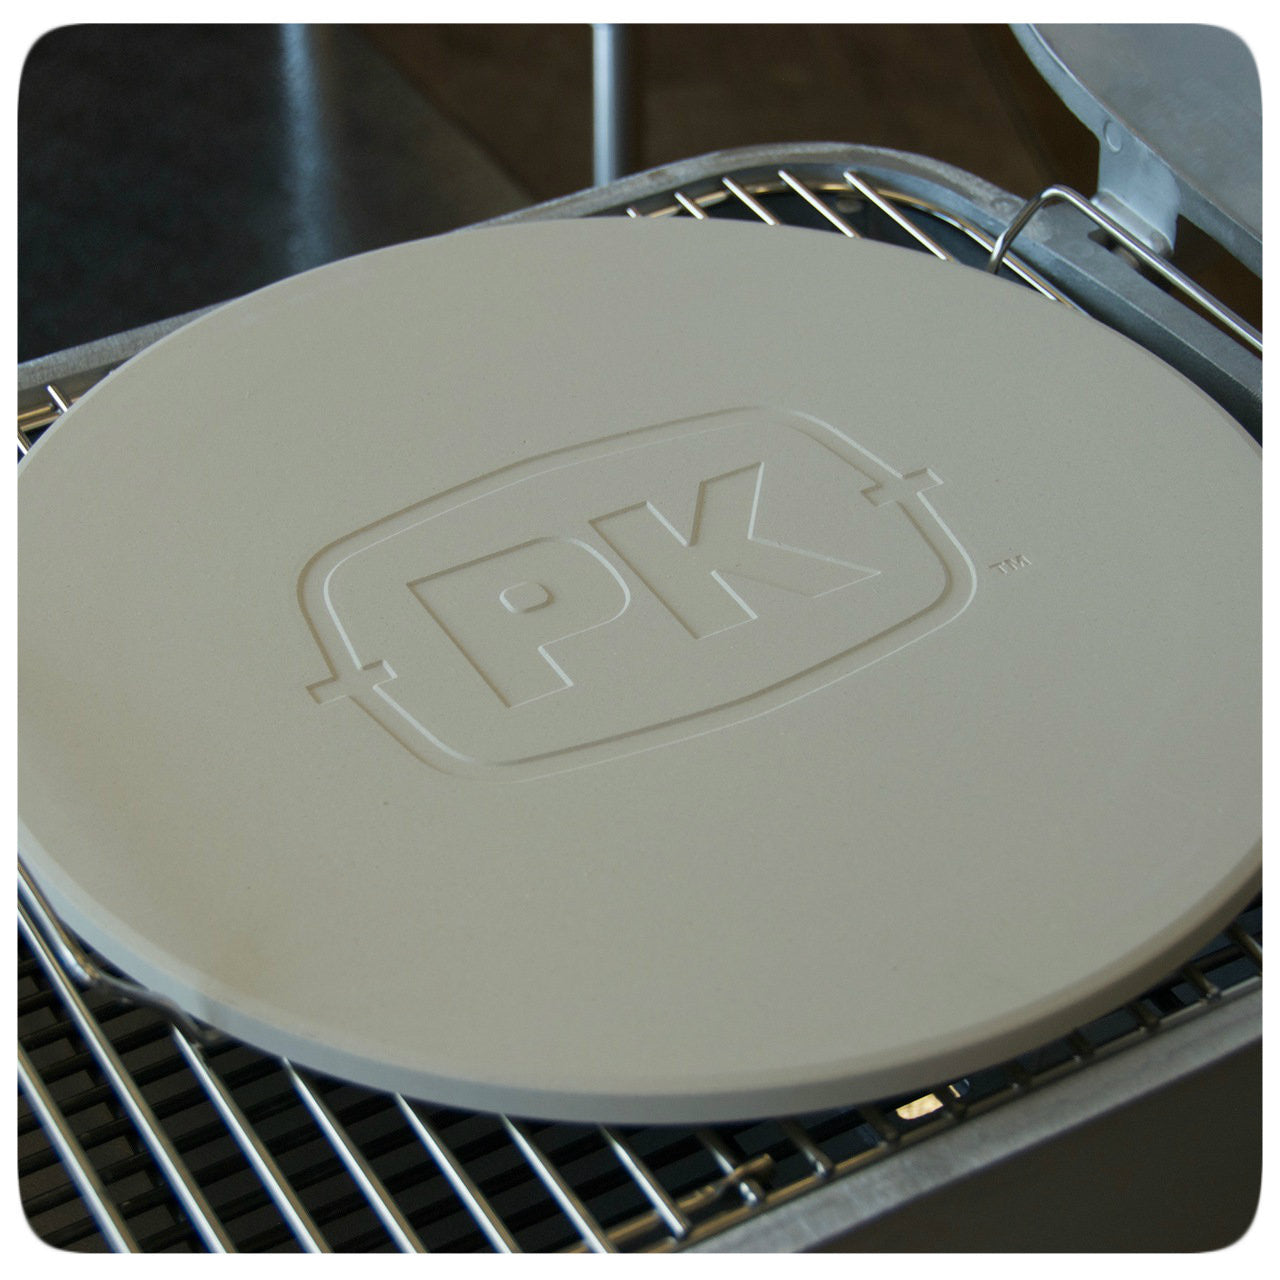 Pk Grills Pizza Stone Placed on the Grill